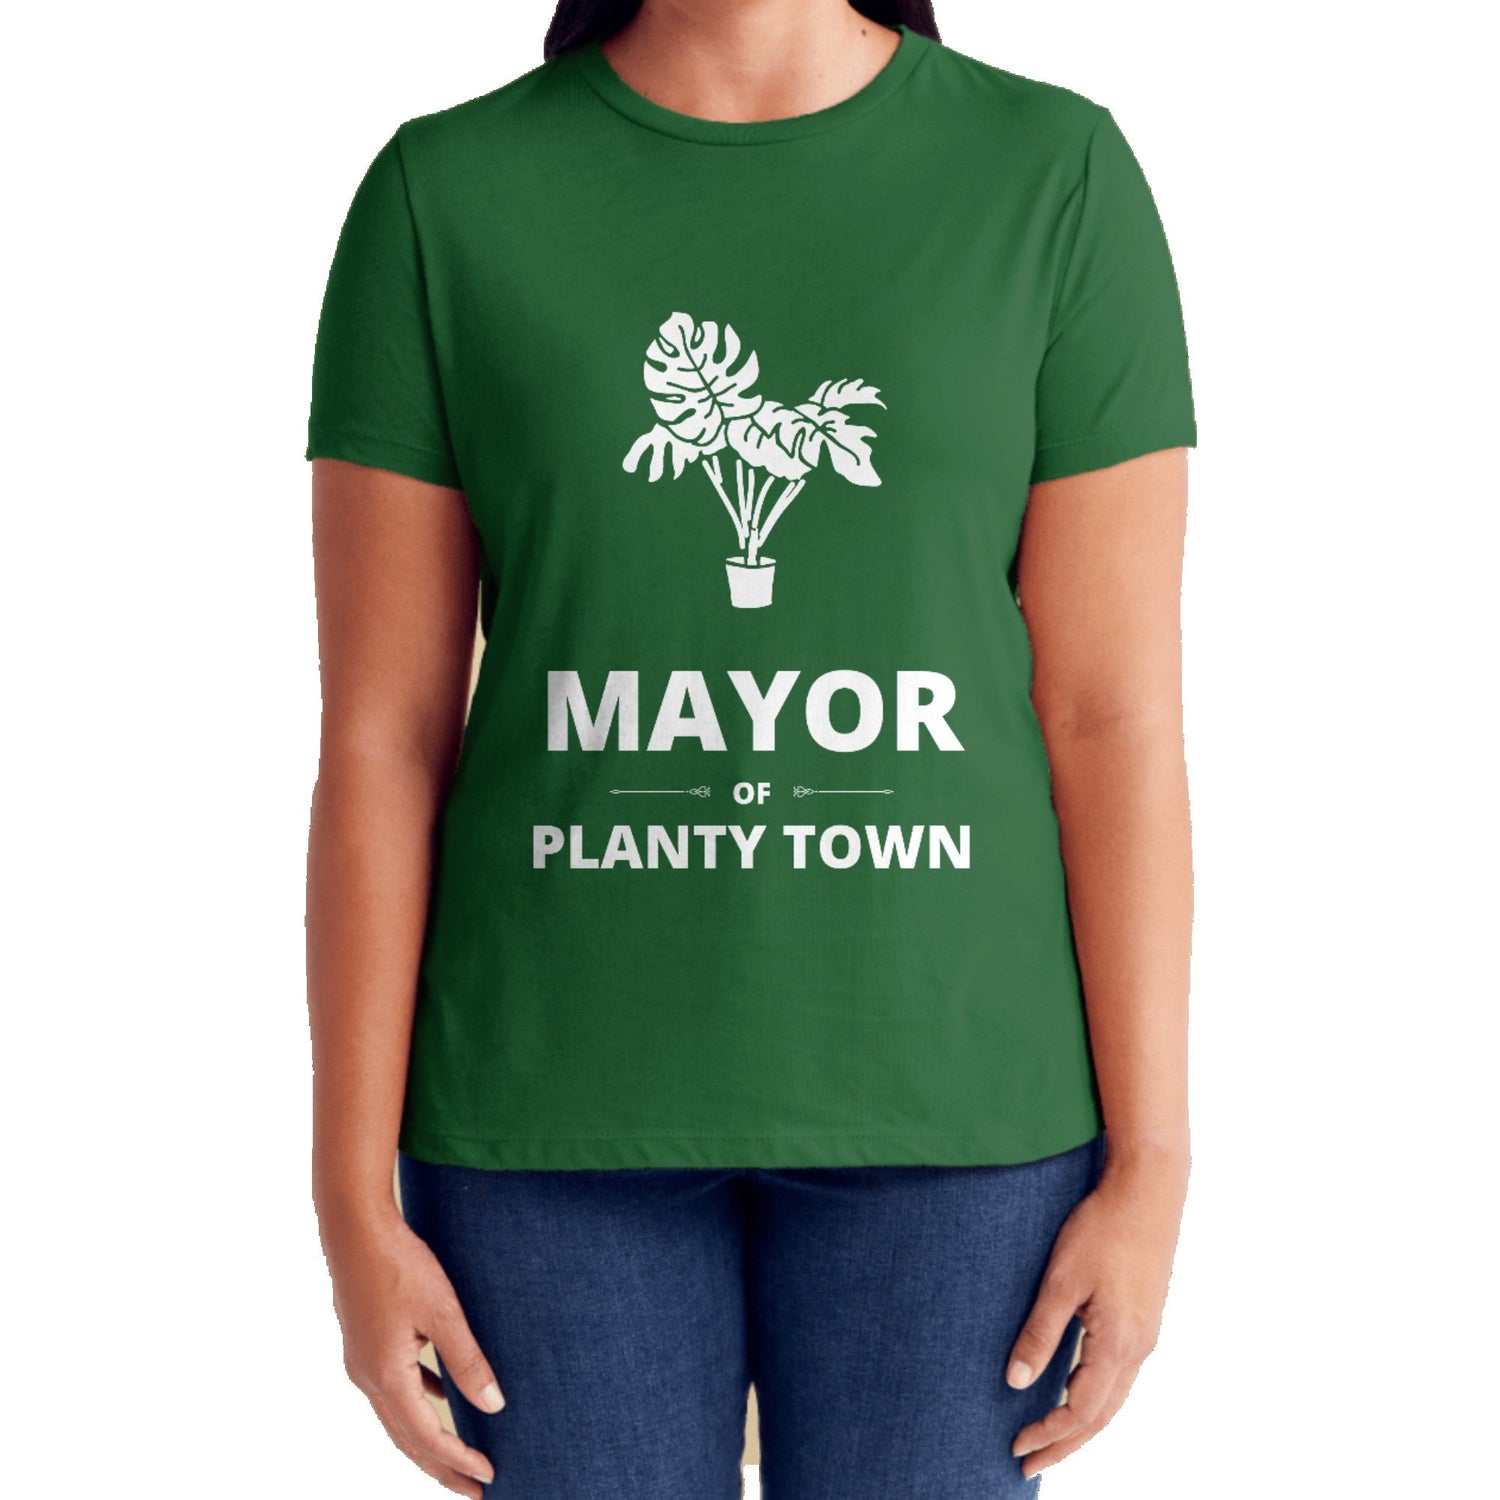 Mayor of Planty Town - T-Shirt